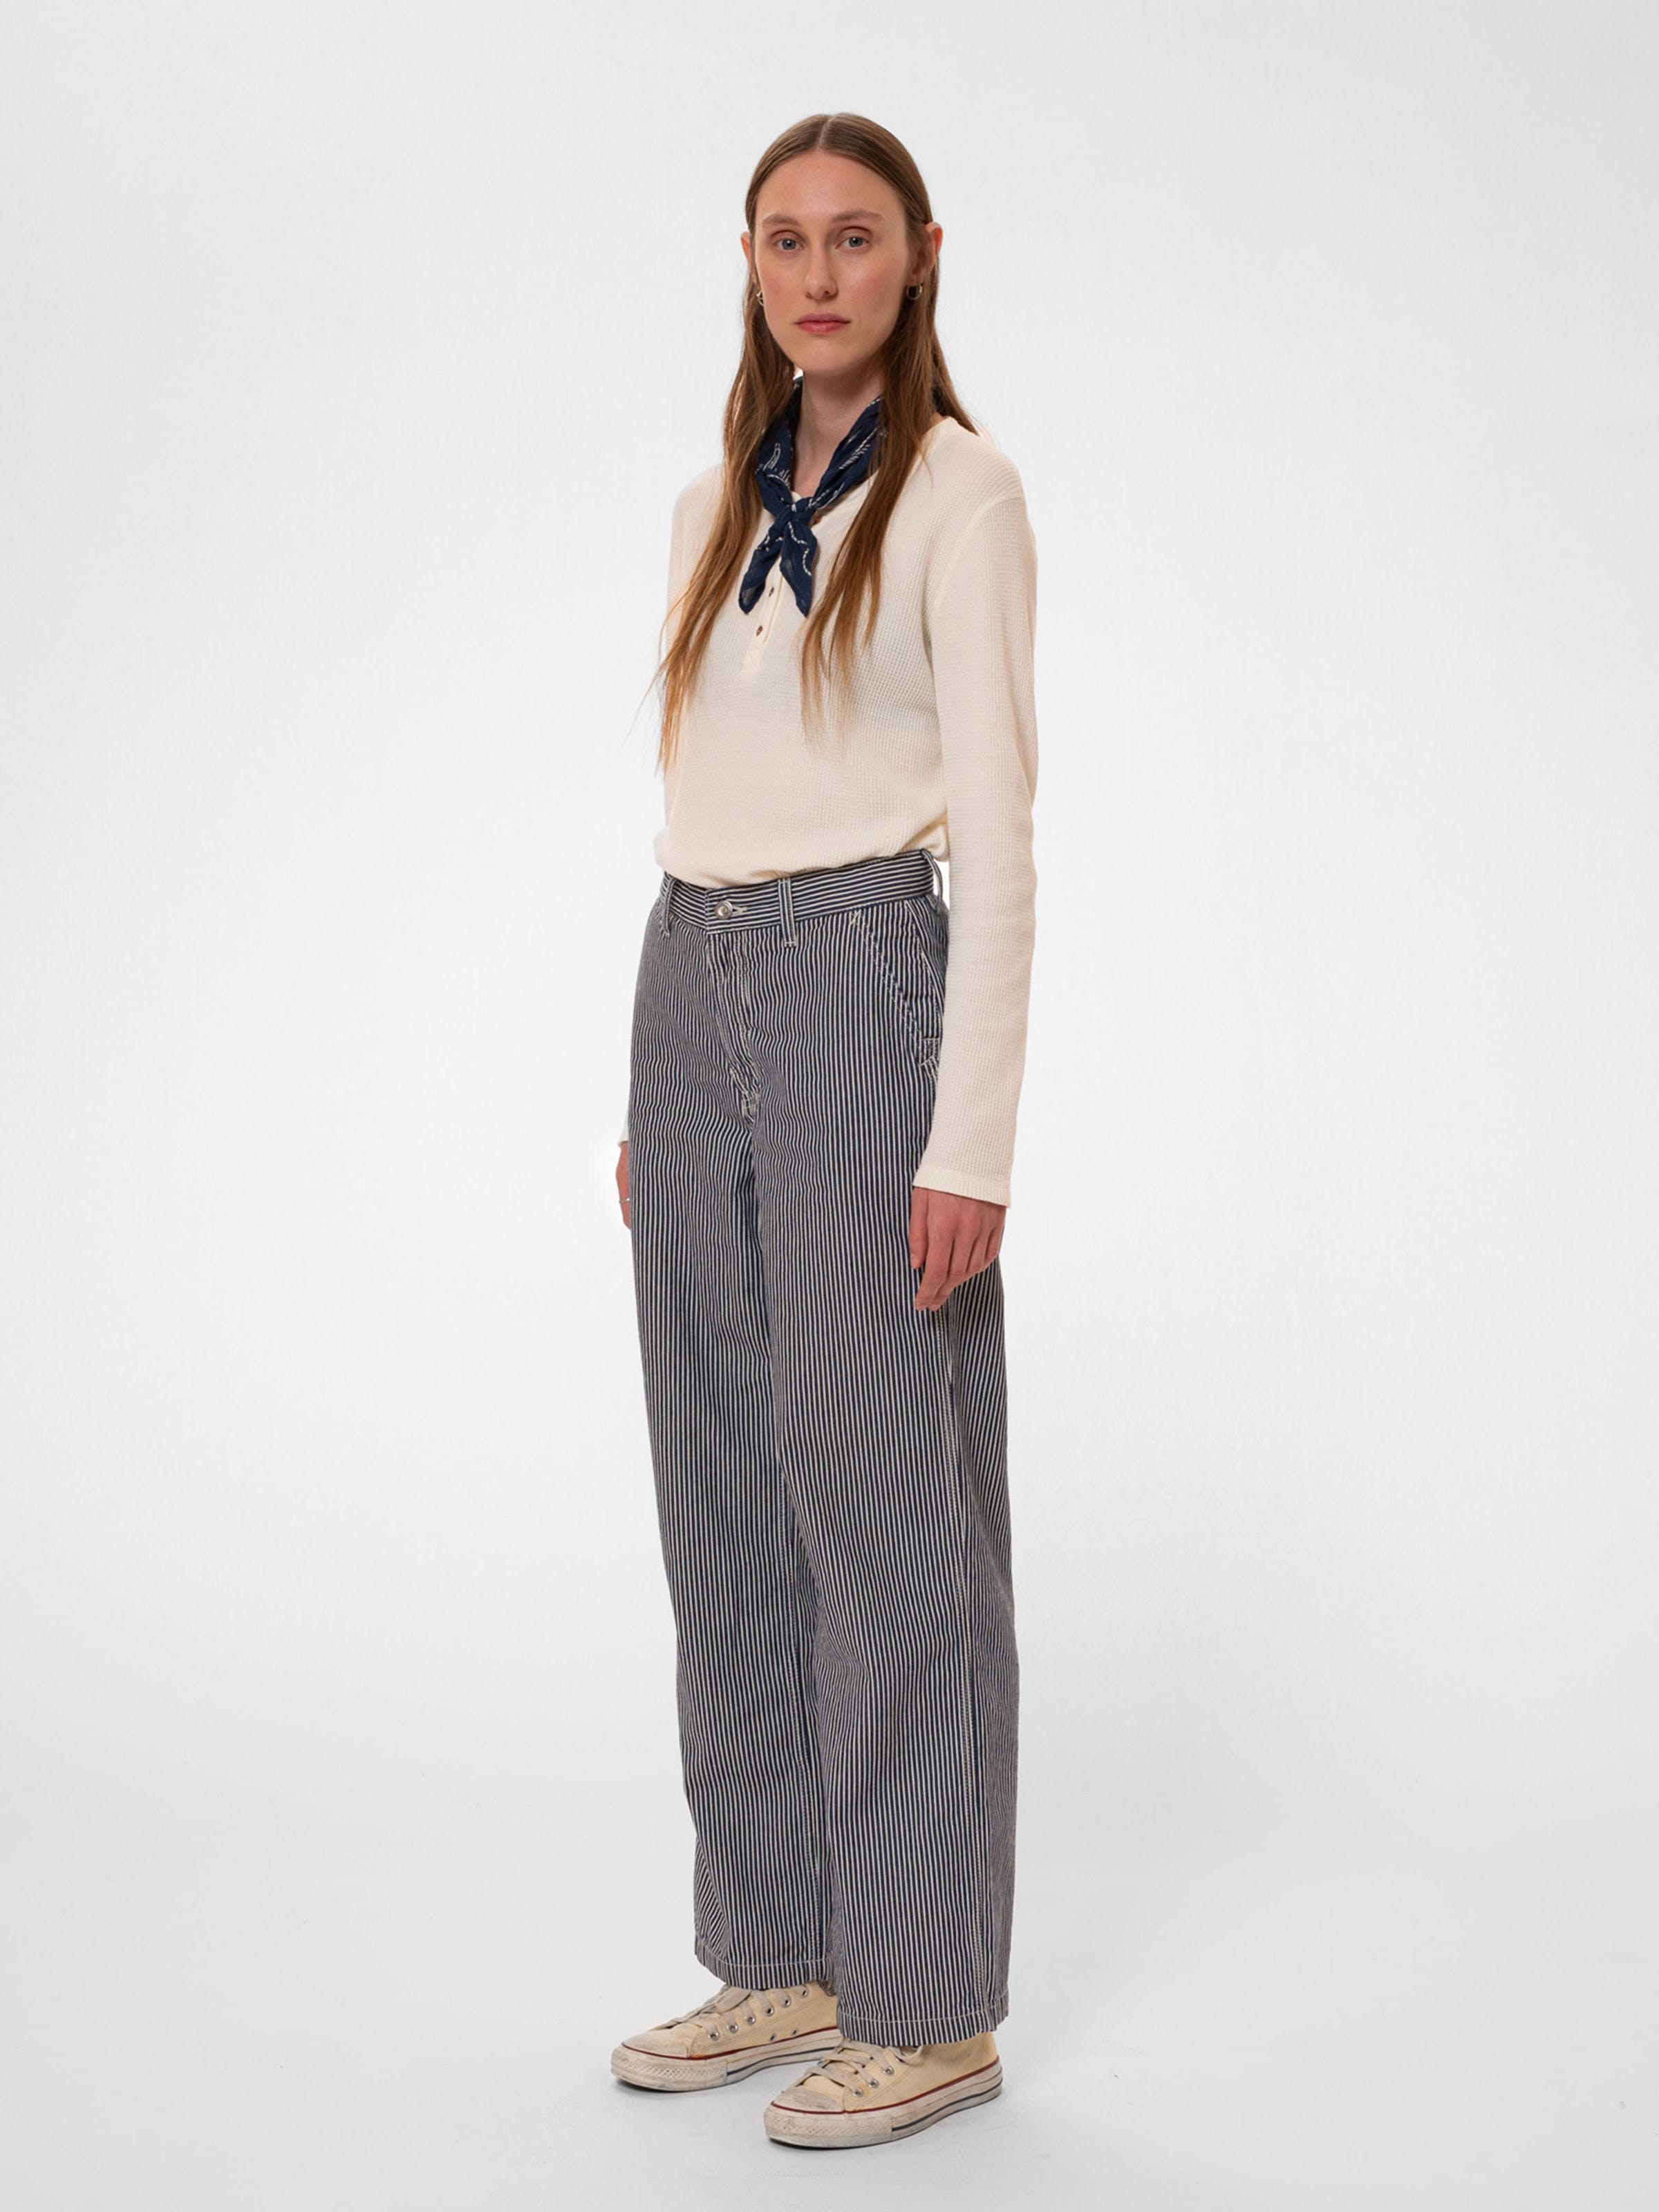 Nudie - Stina Hickory Striped Pant - Blue/Offwhite